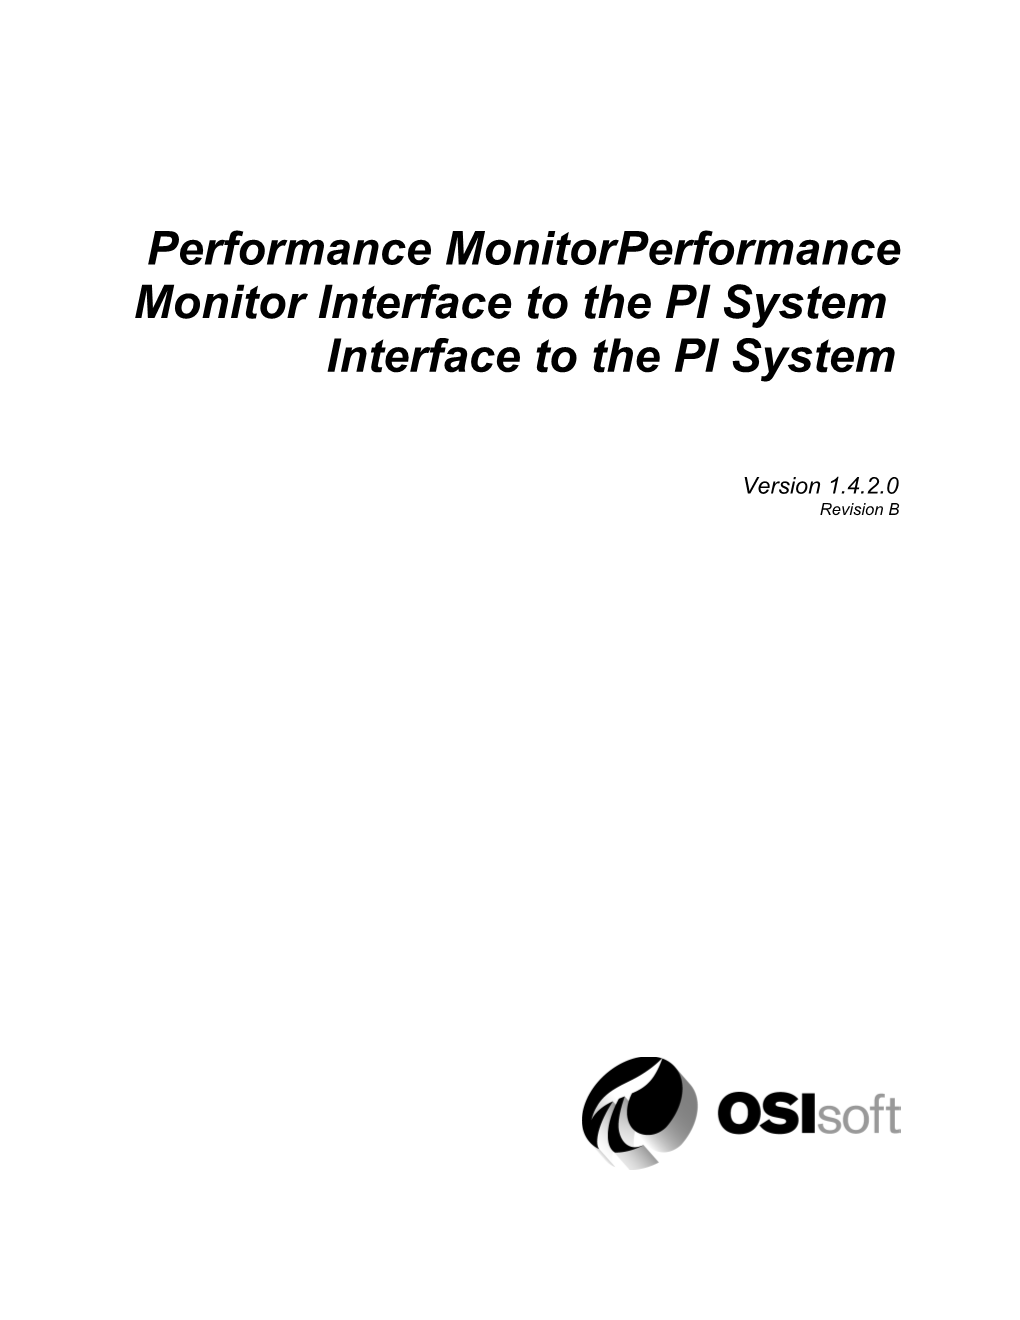 Performance Monitor Interface to the PI System